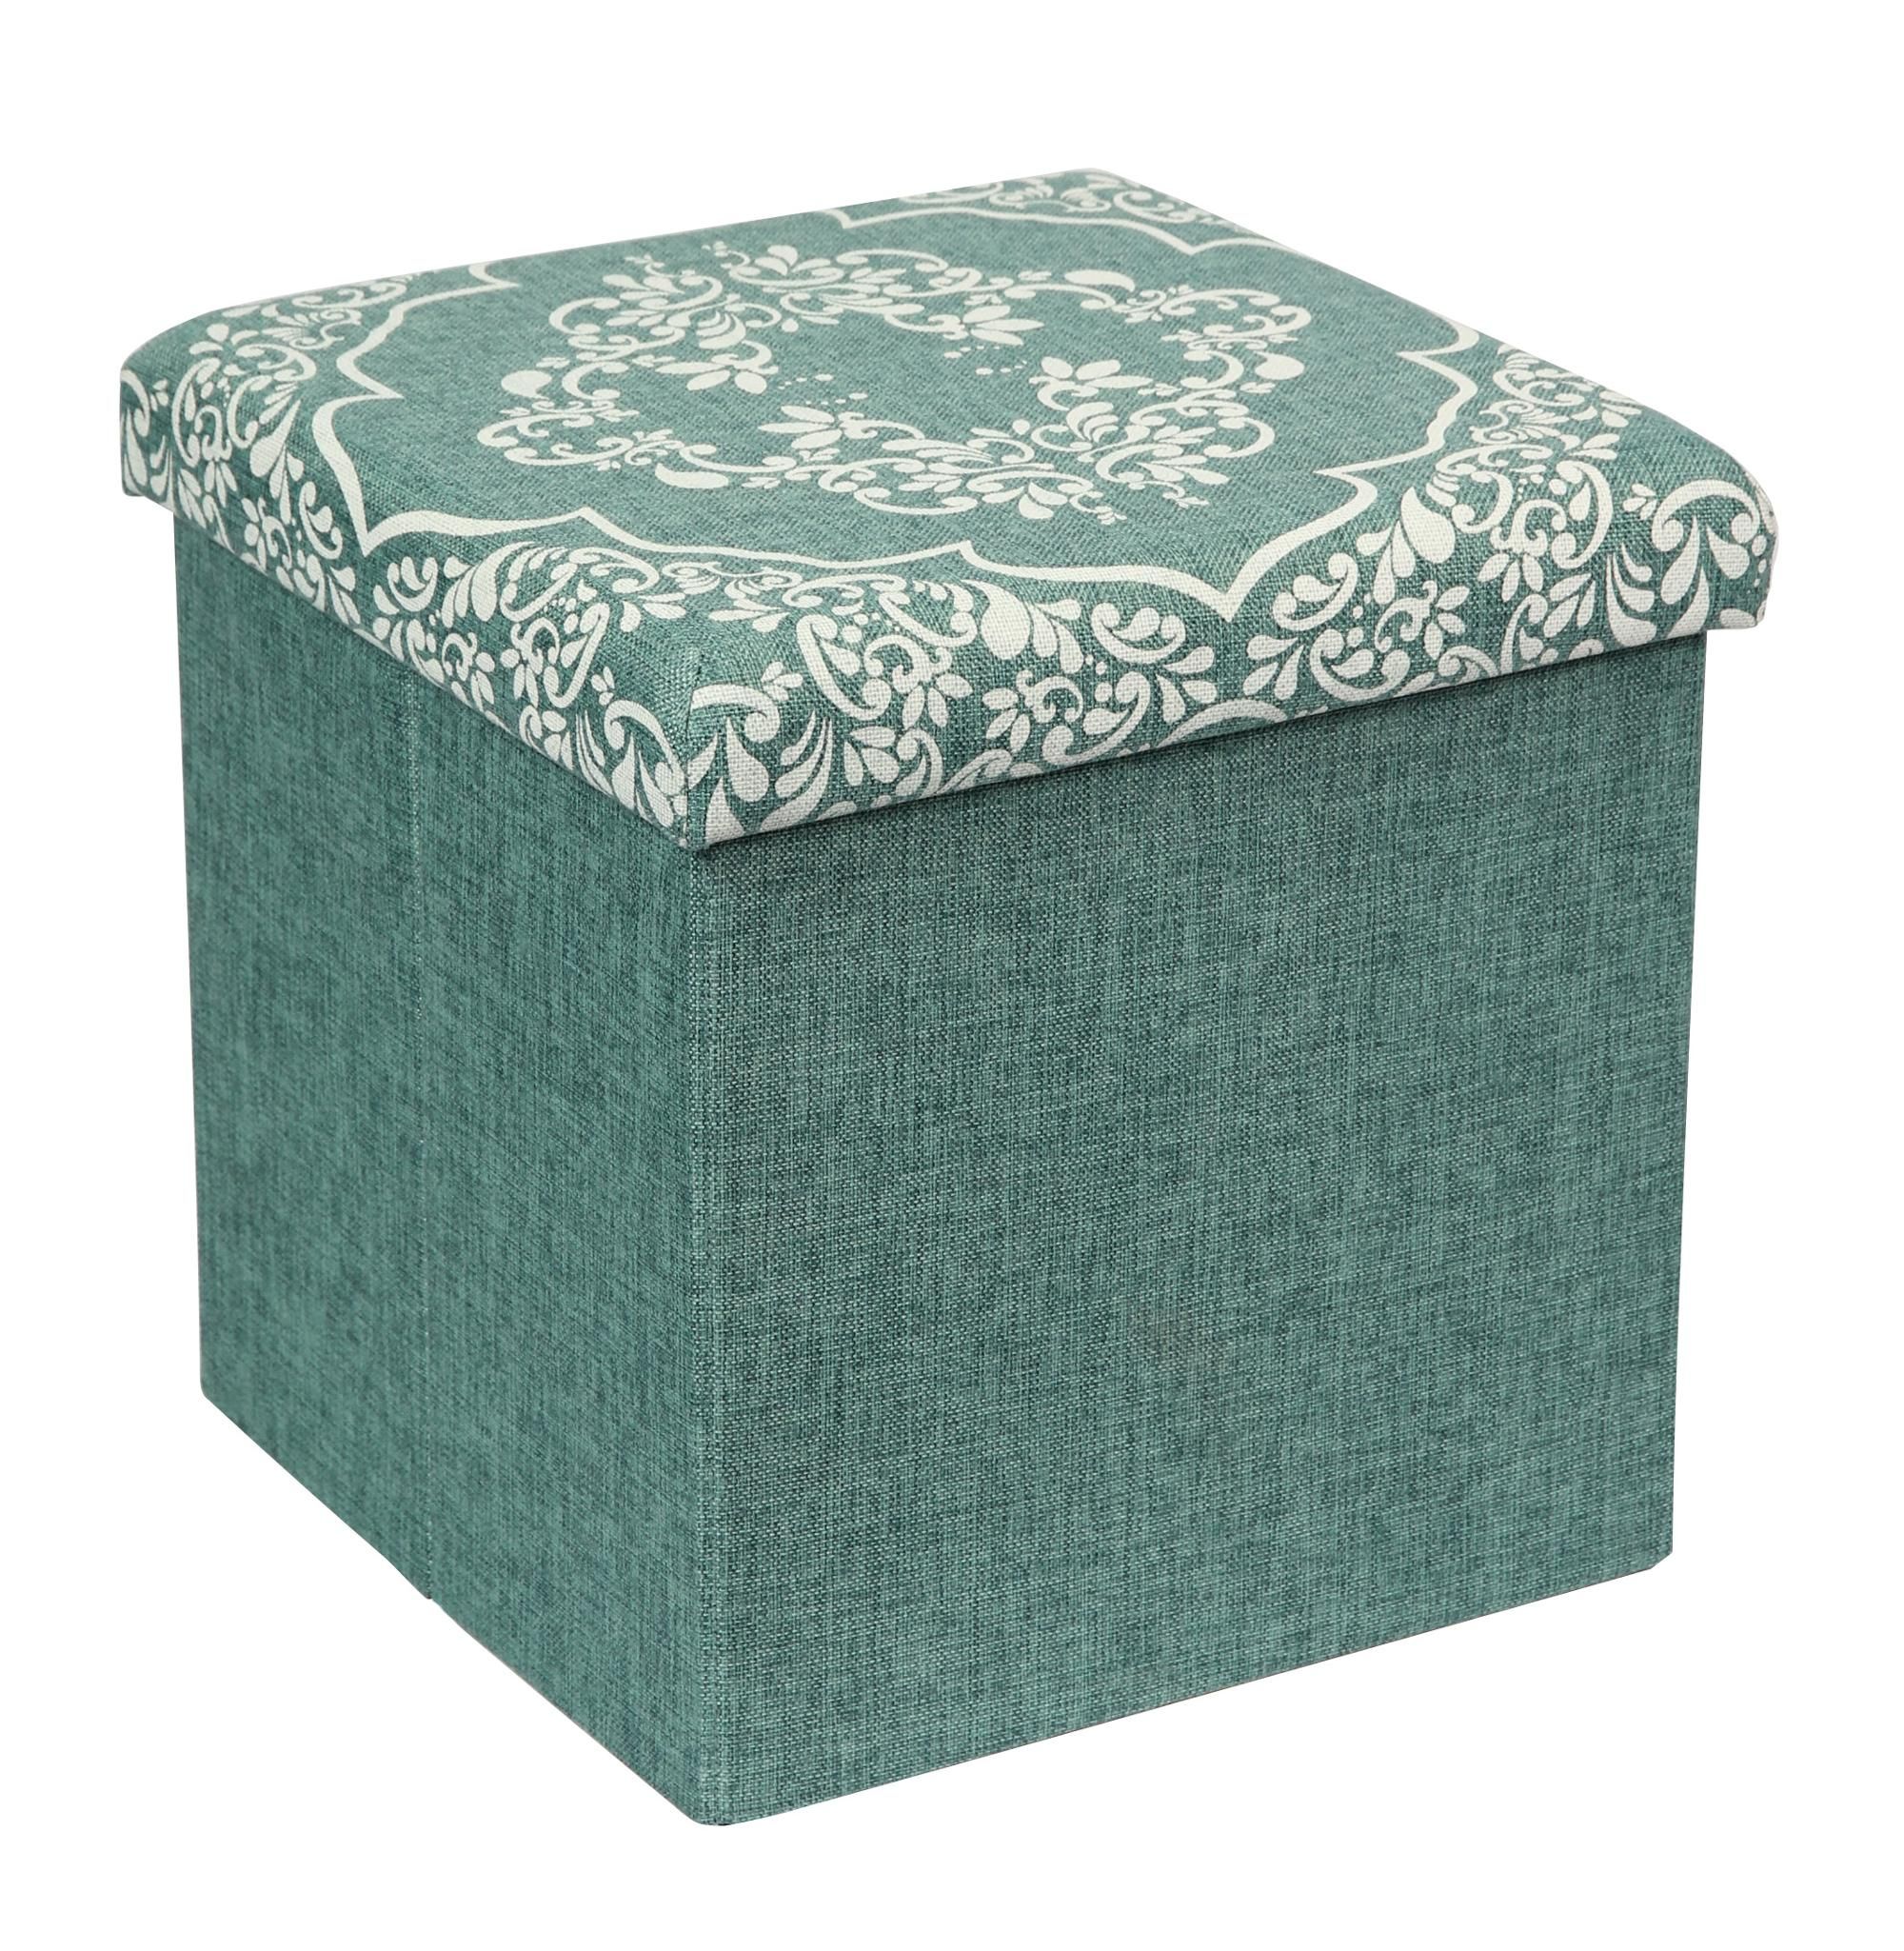 Faux Linen Fabric Printed Foot Rest Pouf Stool Folding Storage Ottoman Inside Fabric Storage Ottomans (Gallery 20 of 20)